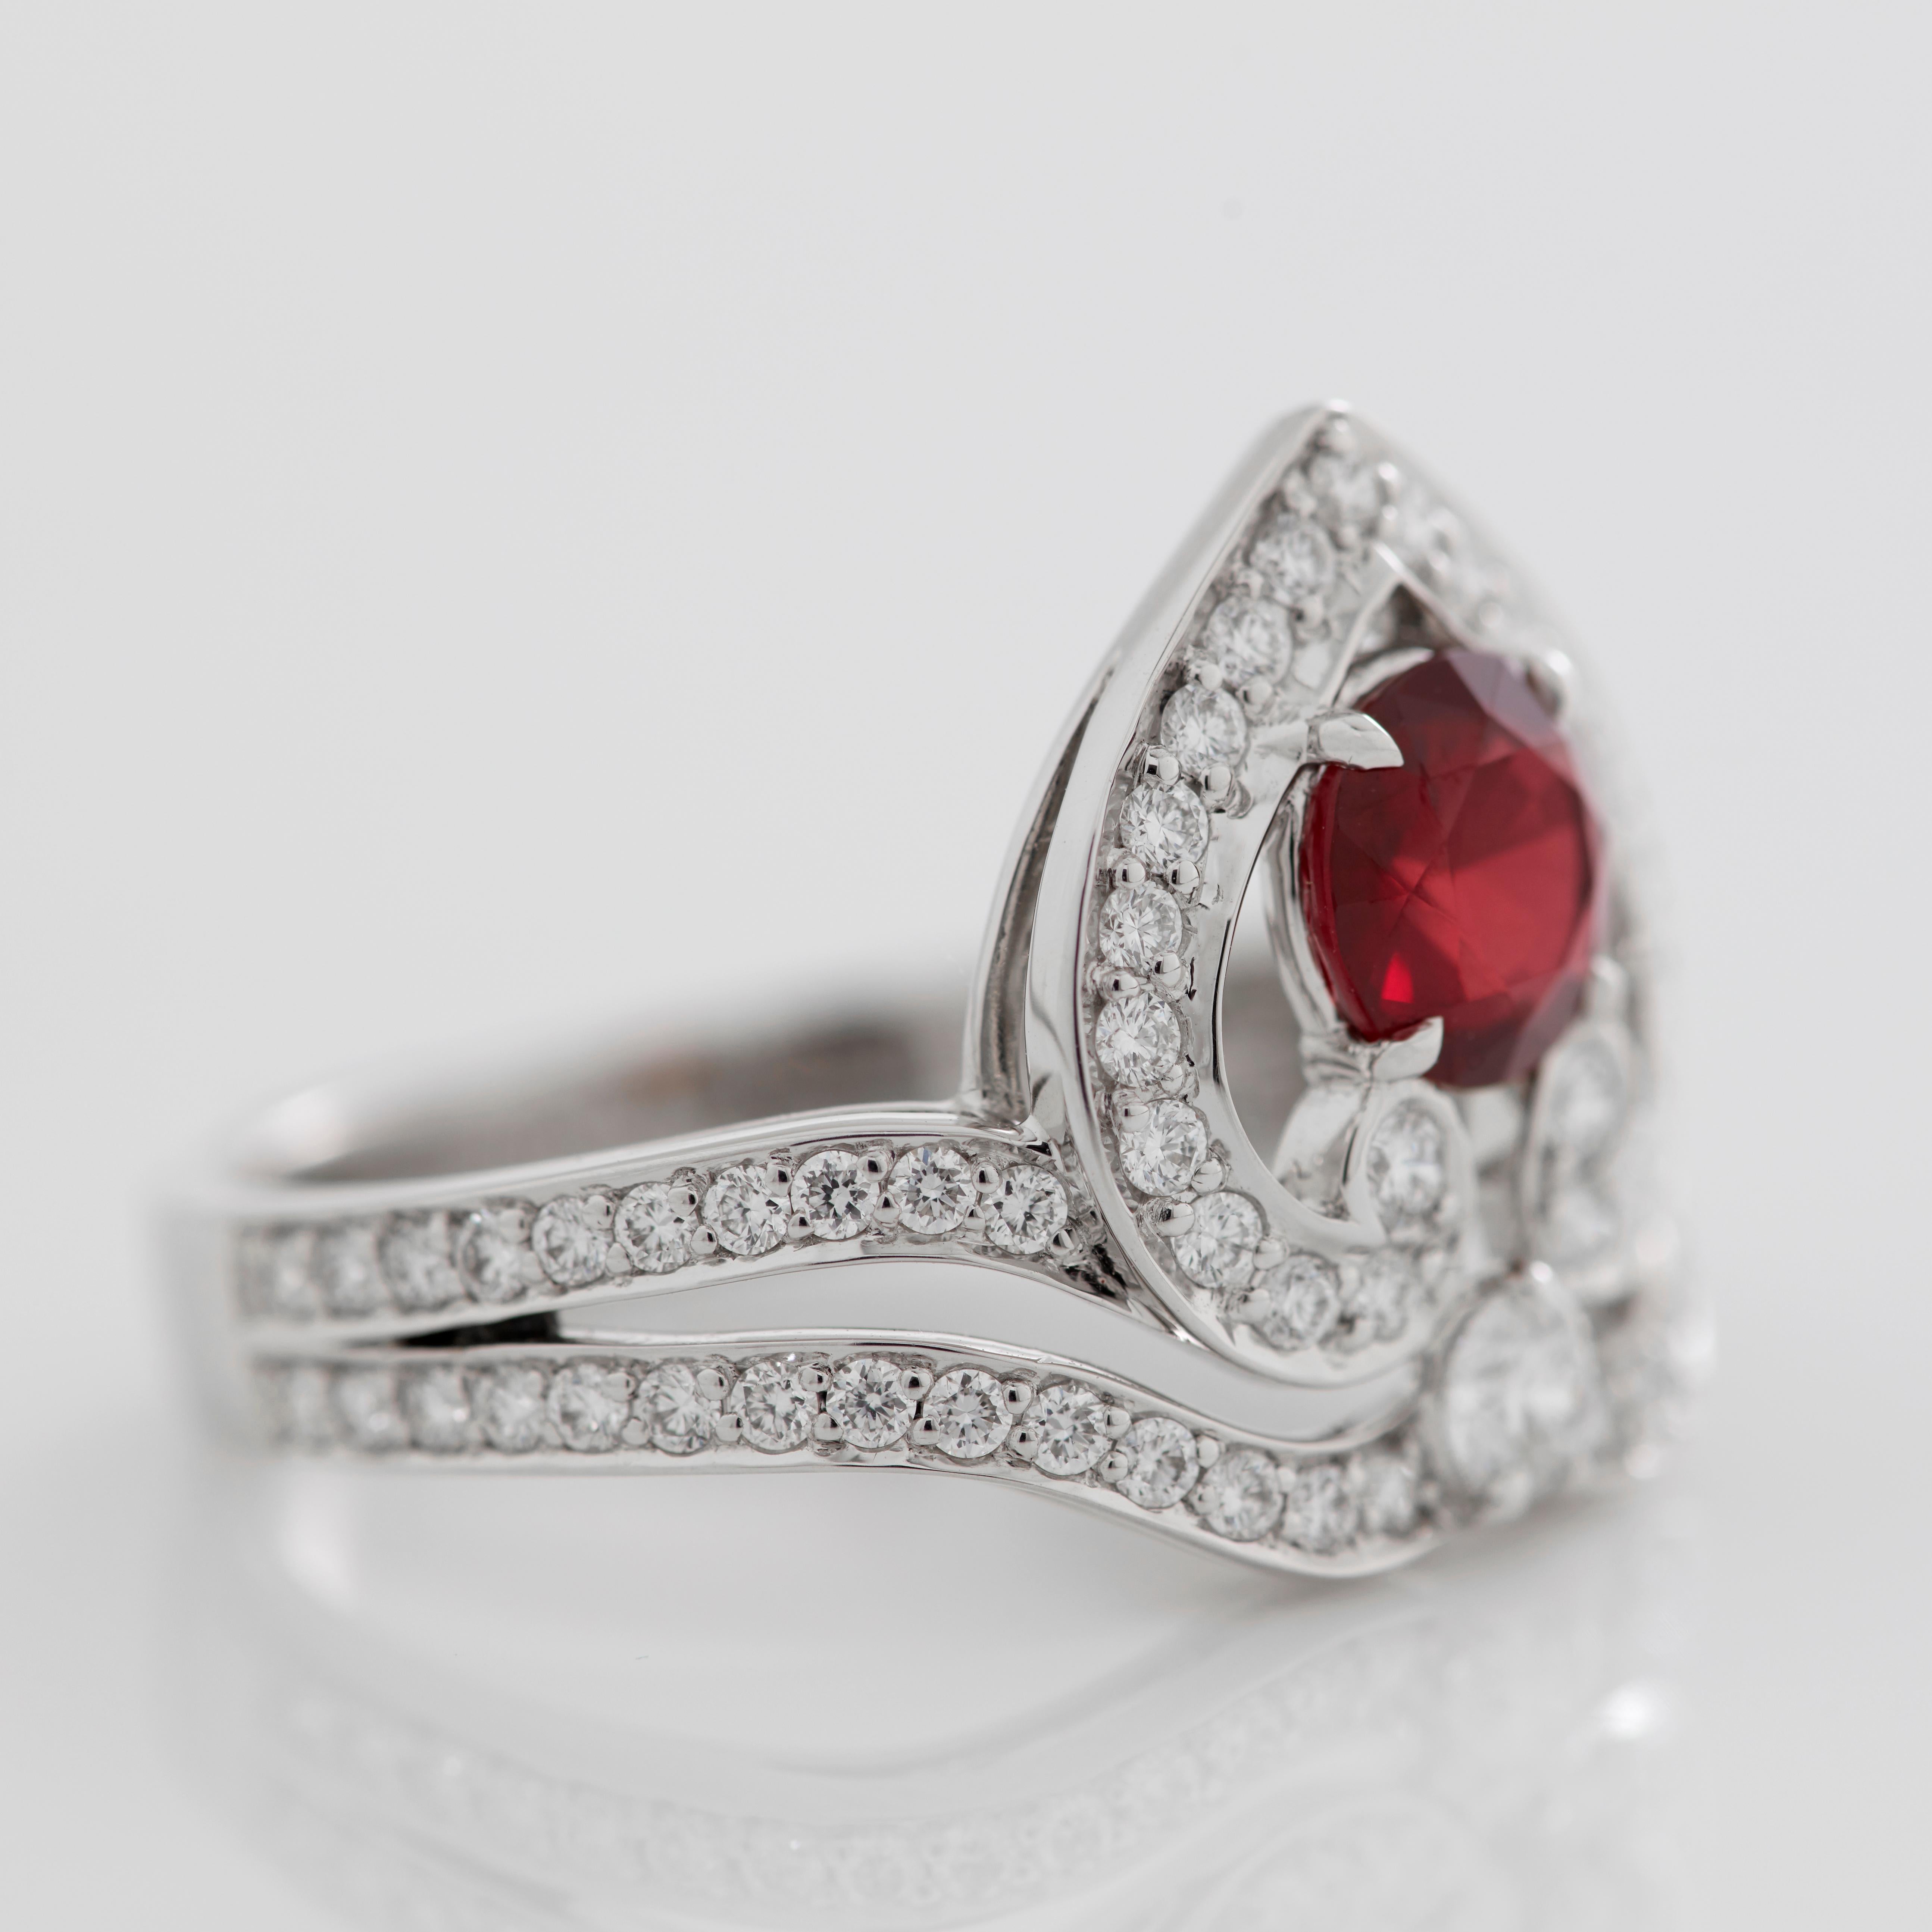 Garrard 'Regal Cascade' 18 Karat White Gold, White Diamond and Ruby Ring In New Condition For Sale In London, London